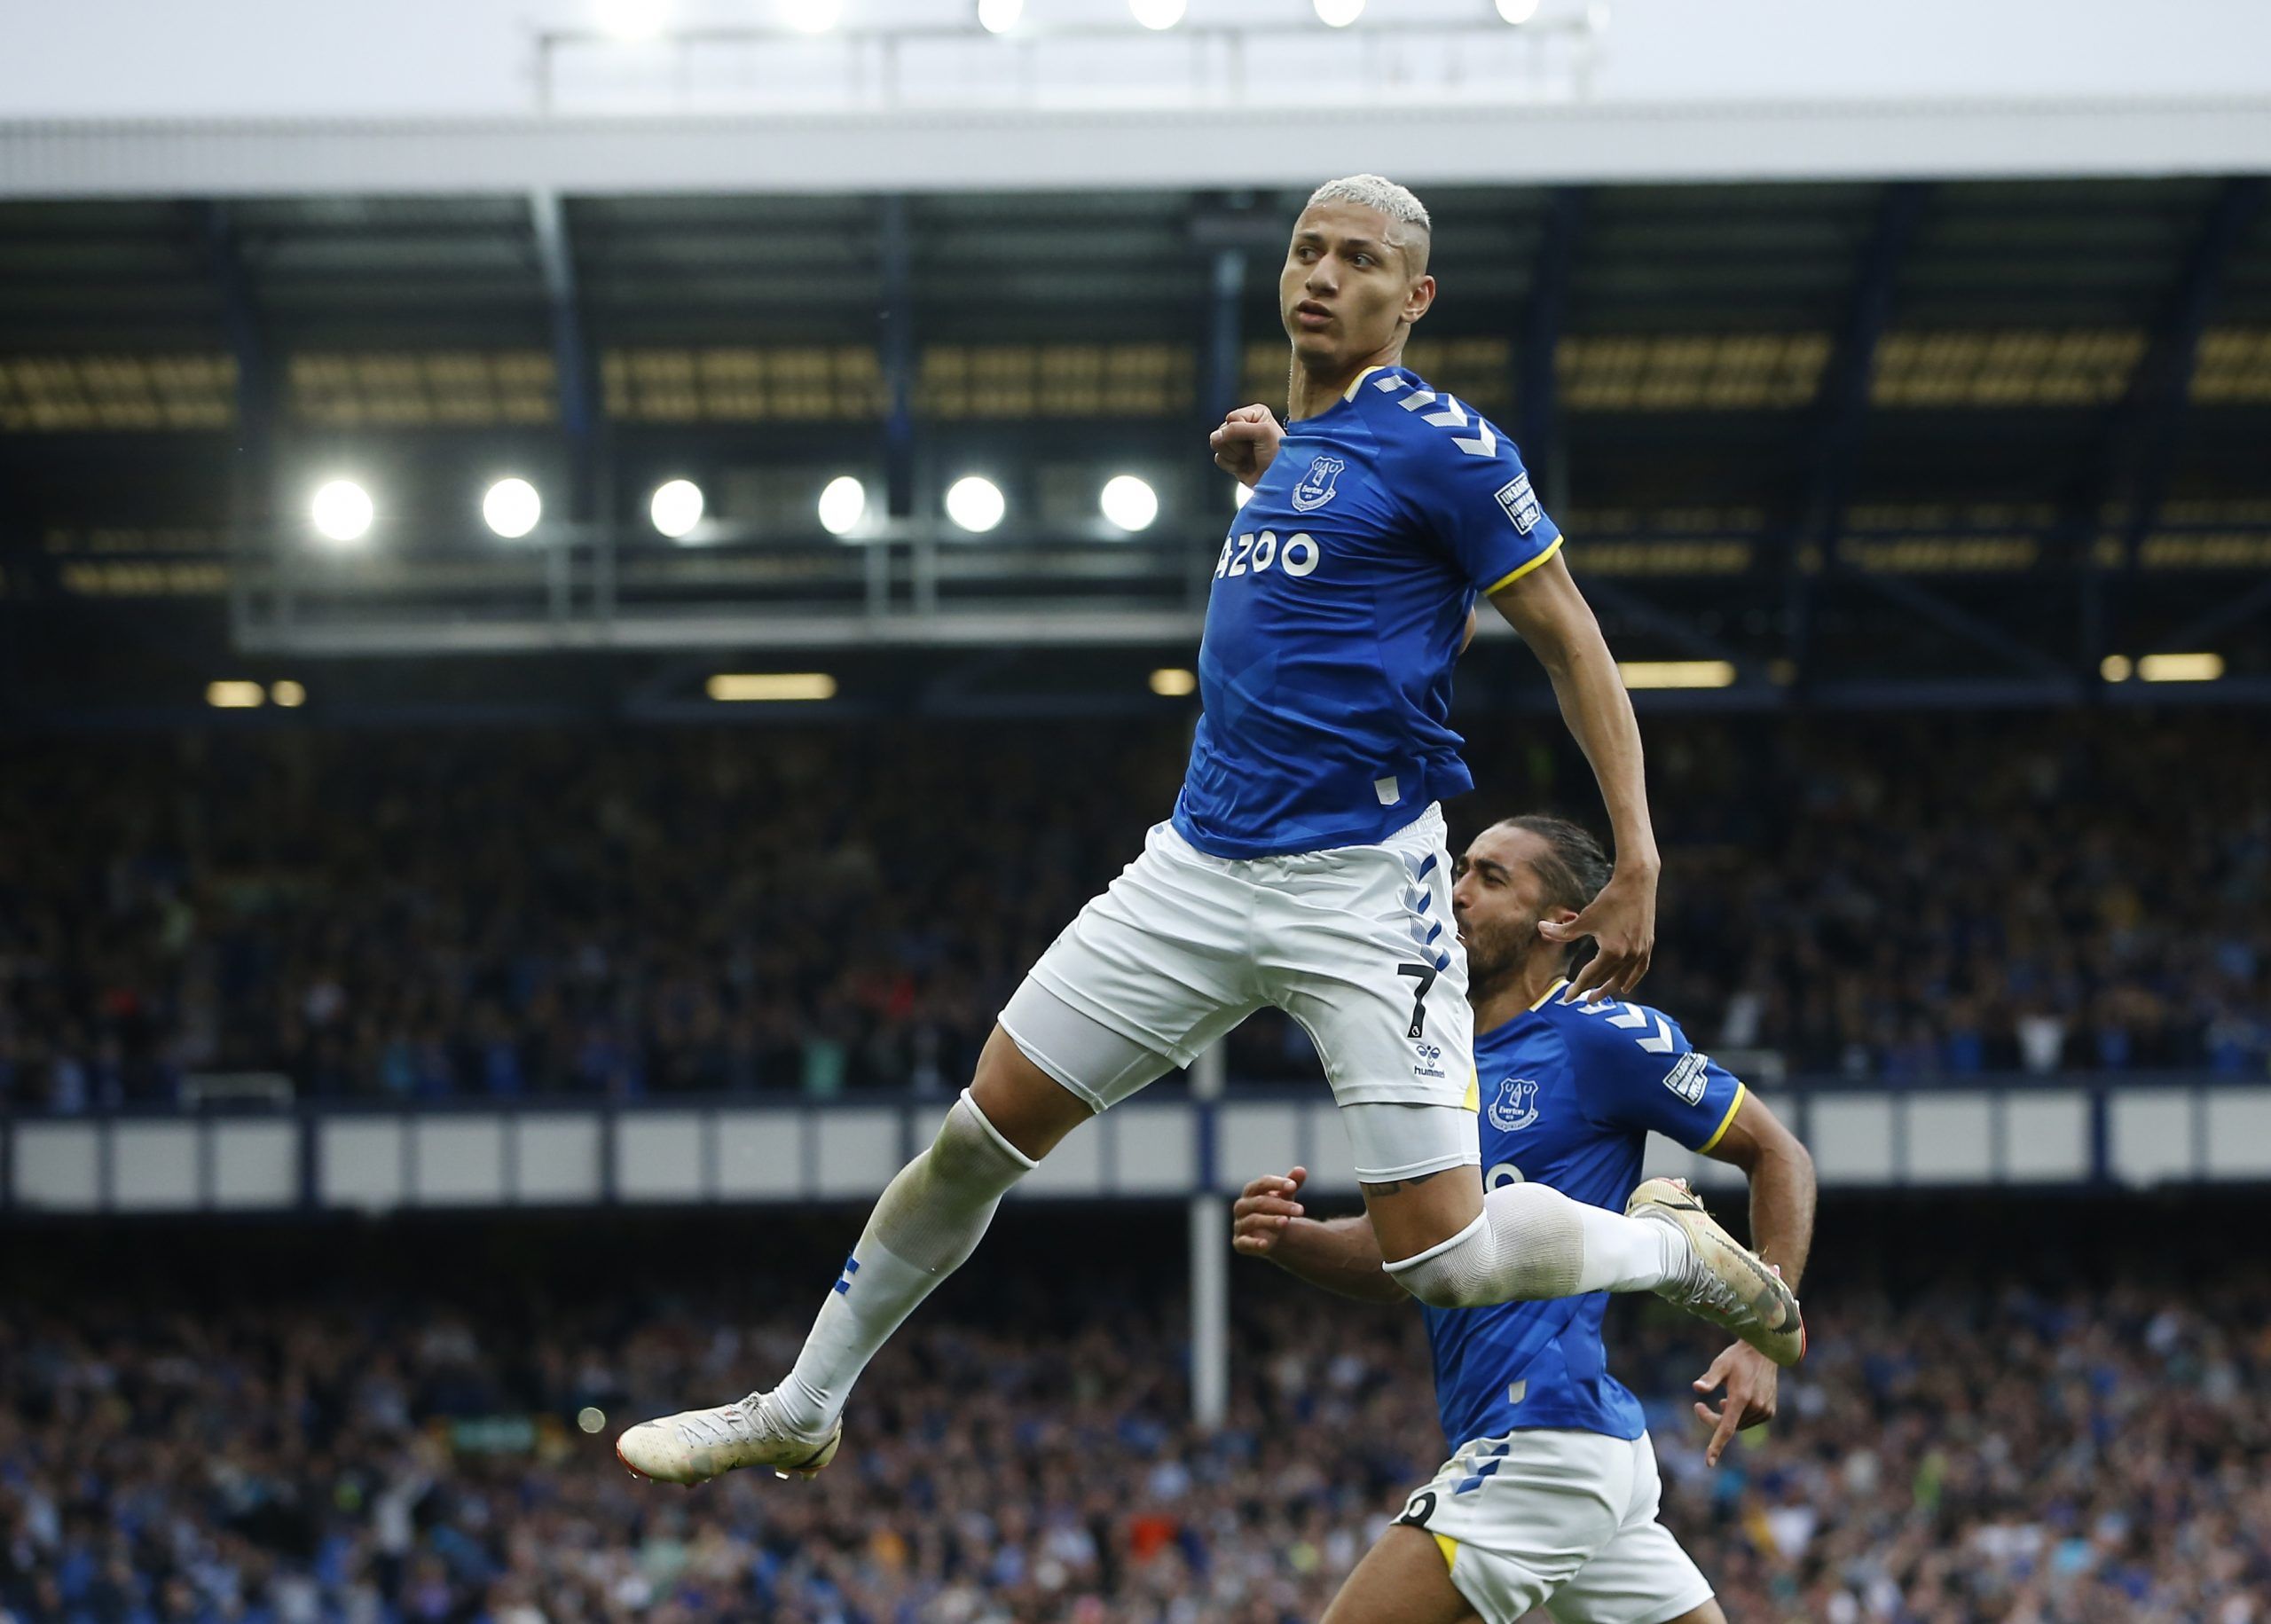 Soccer Football - Premier League - Everton v Brentford - Goodison Park, Liverpool, Britain - May 15, 2022 Everton's Richarlison celebrates scoring their second goal with Dominic Calvert-Lewin REUTERS/Craig Brough EDITORIAL USE ONLY. No use with unauthorized audio, video, data, fixture lists, club/league logos or 'live' services. Online in-match use limited to 75 images, no video emulation. No use in betting, games or single club /league/player publications.  Please contact your account represent